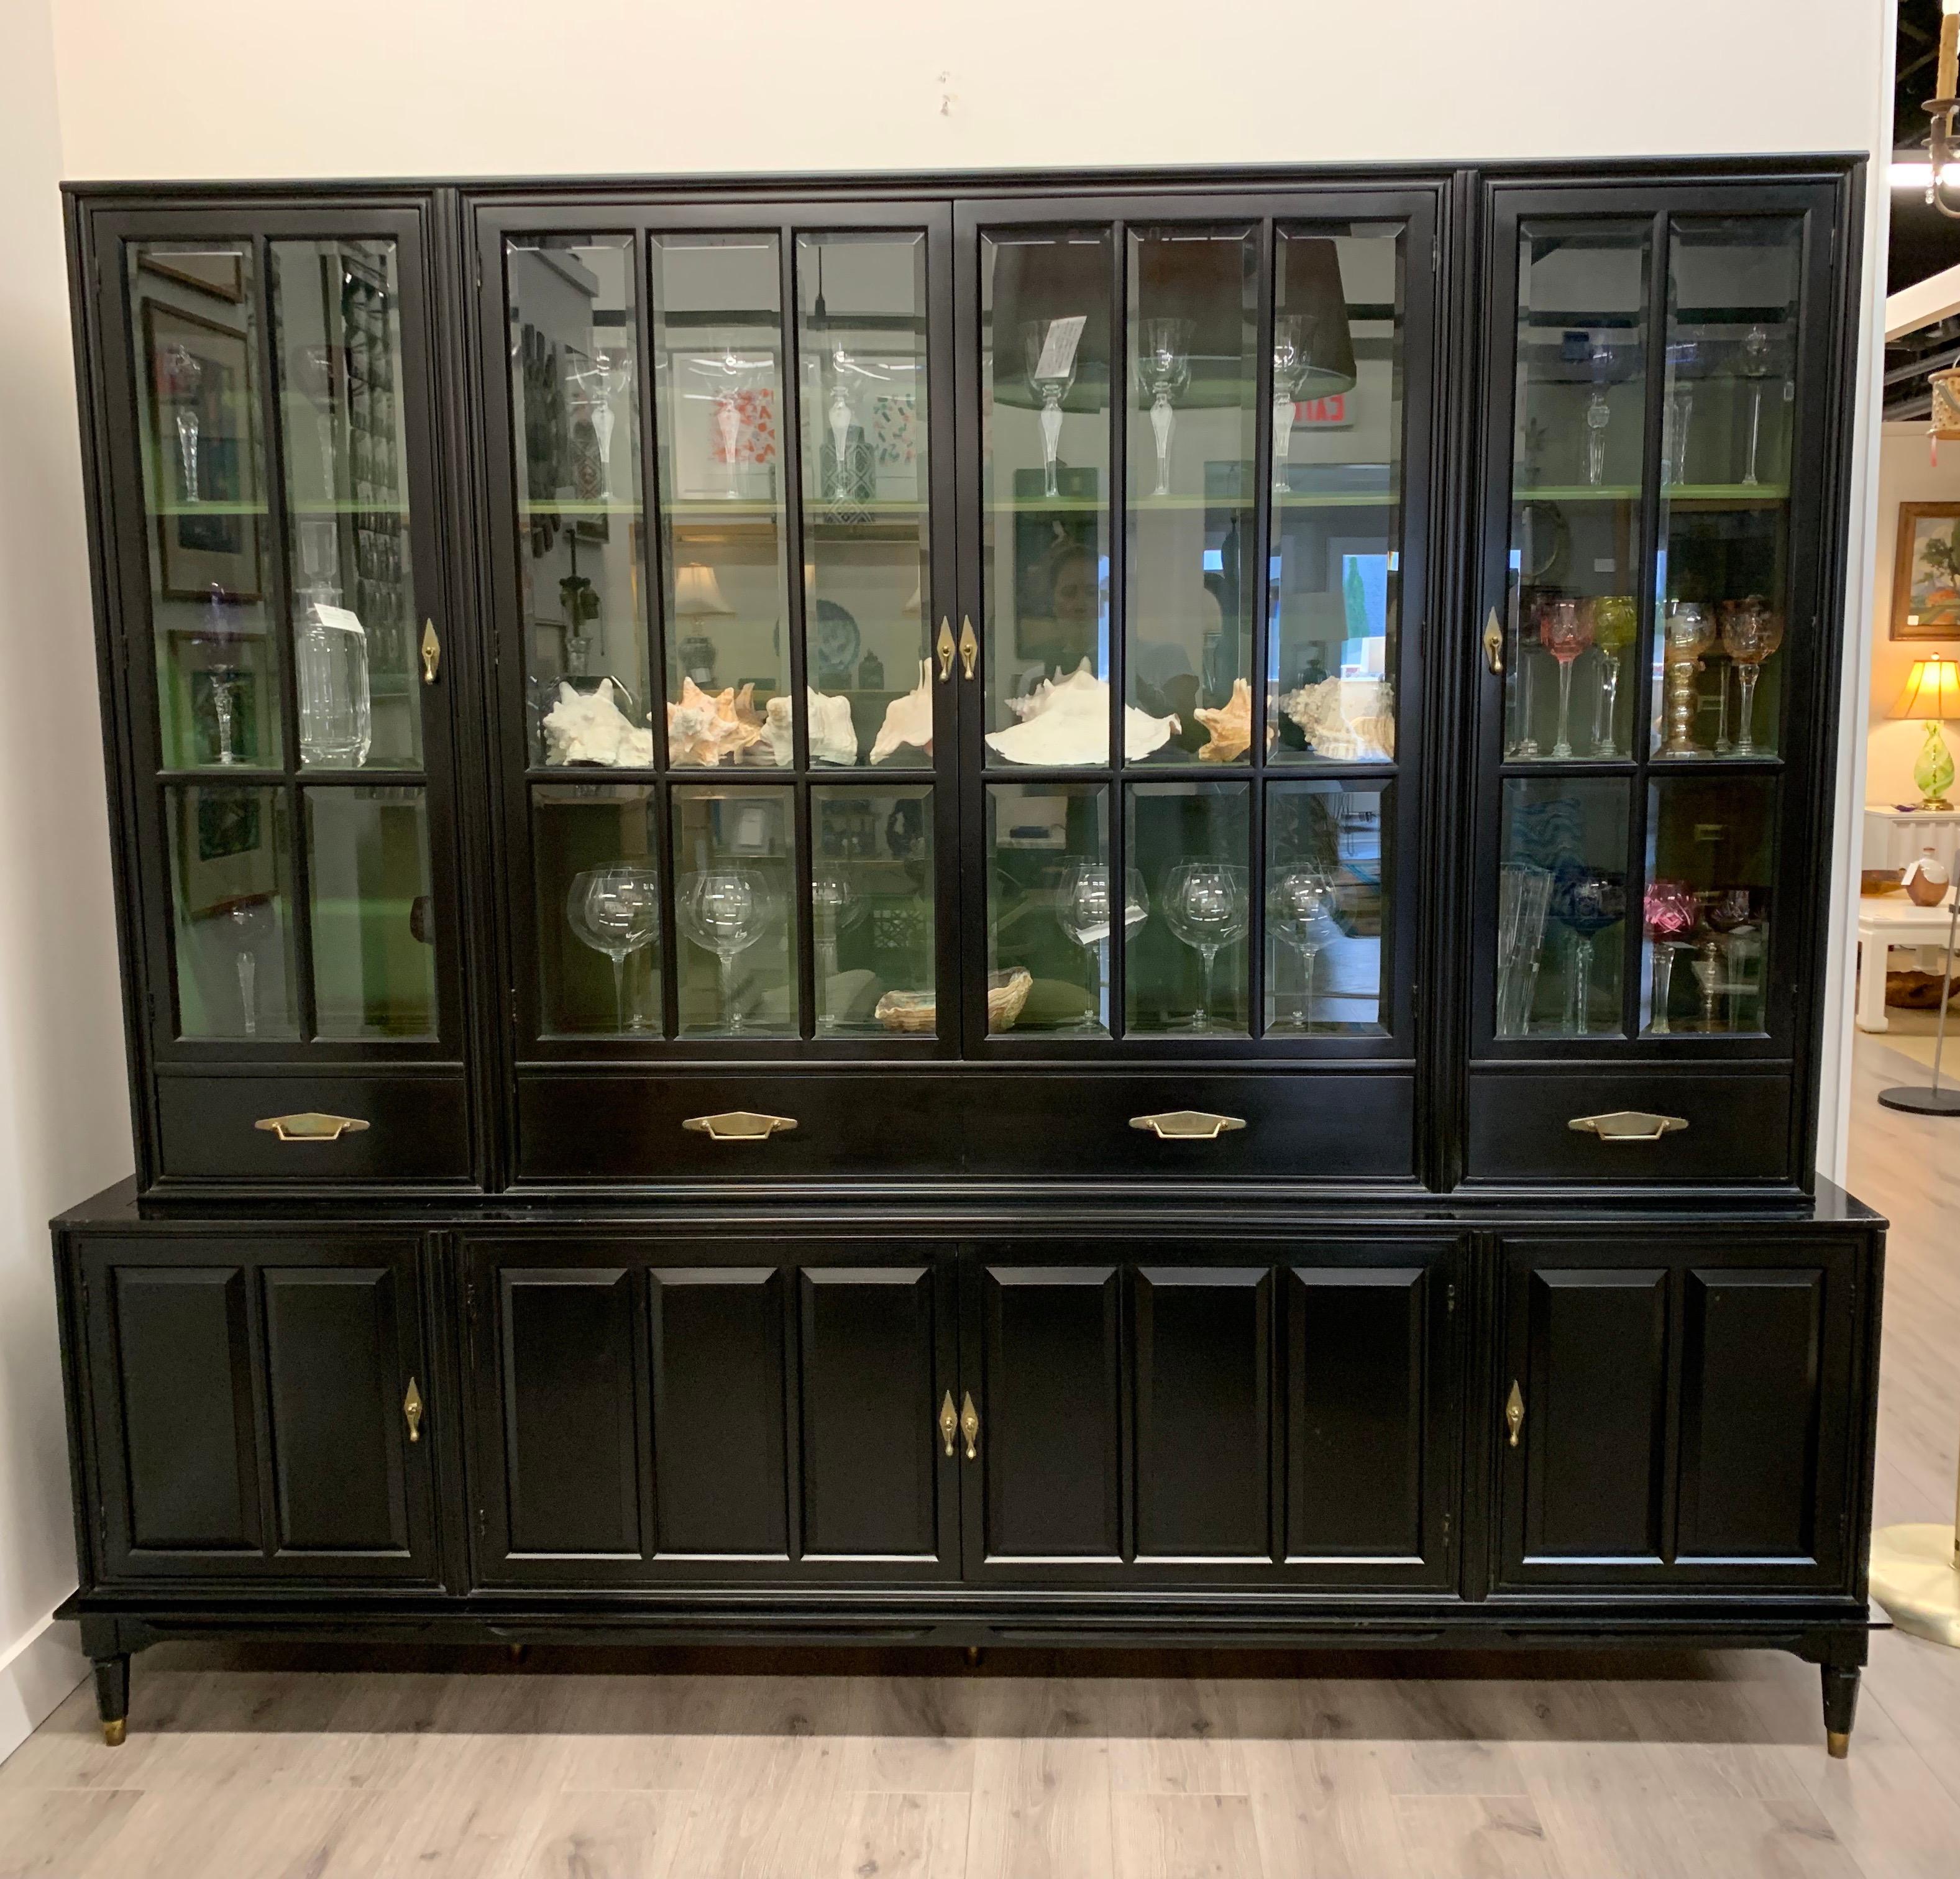 Elegant large black 1950s display cabinet which features a black and glass exterior as well as green hand painted interior shelving, three levels. It comes in two pieces, a top and bottom.